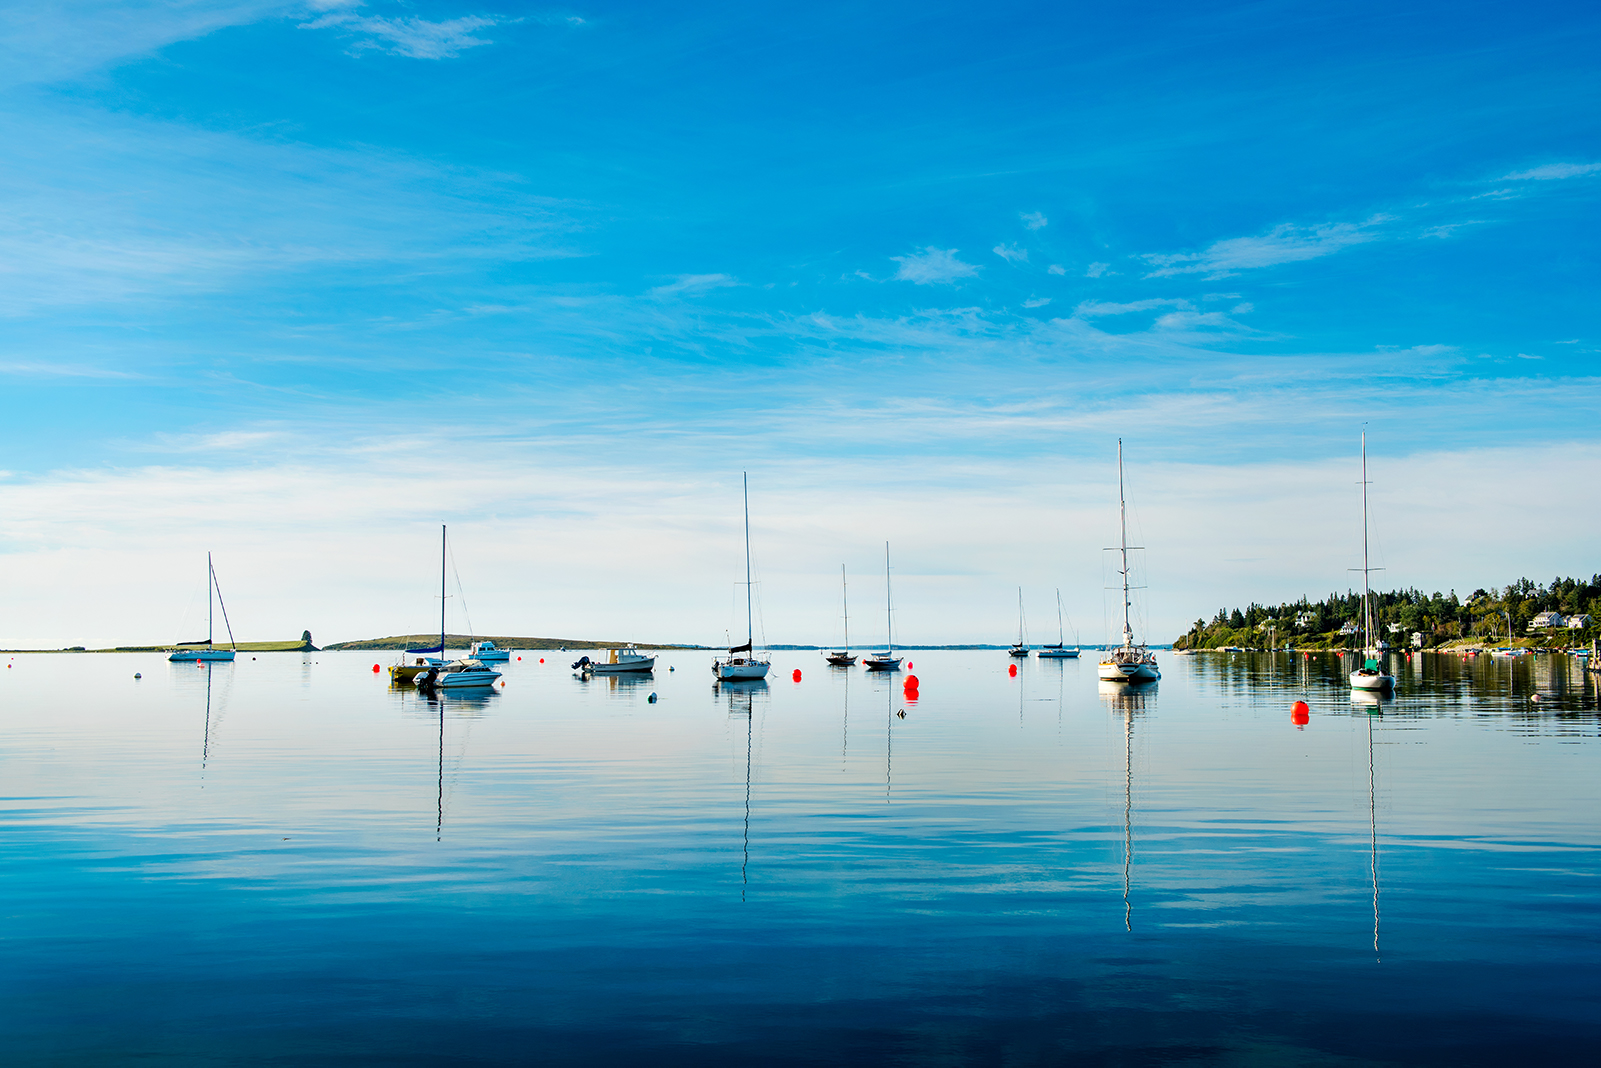 sailboats in Chester Harbour on a sunny day with blue skies reflected on calm ocean water